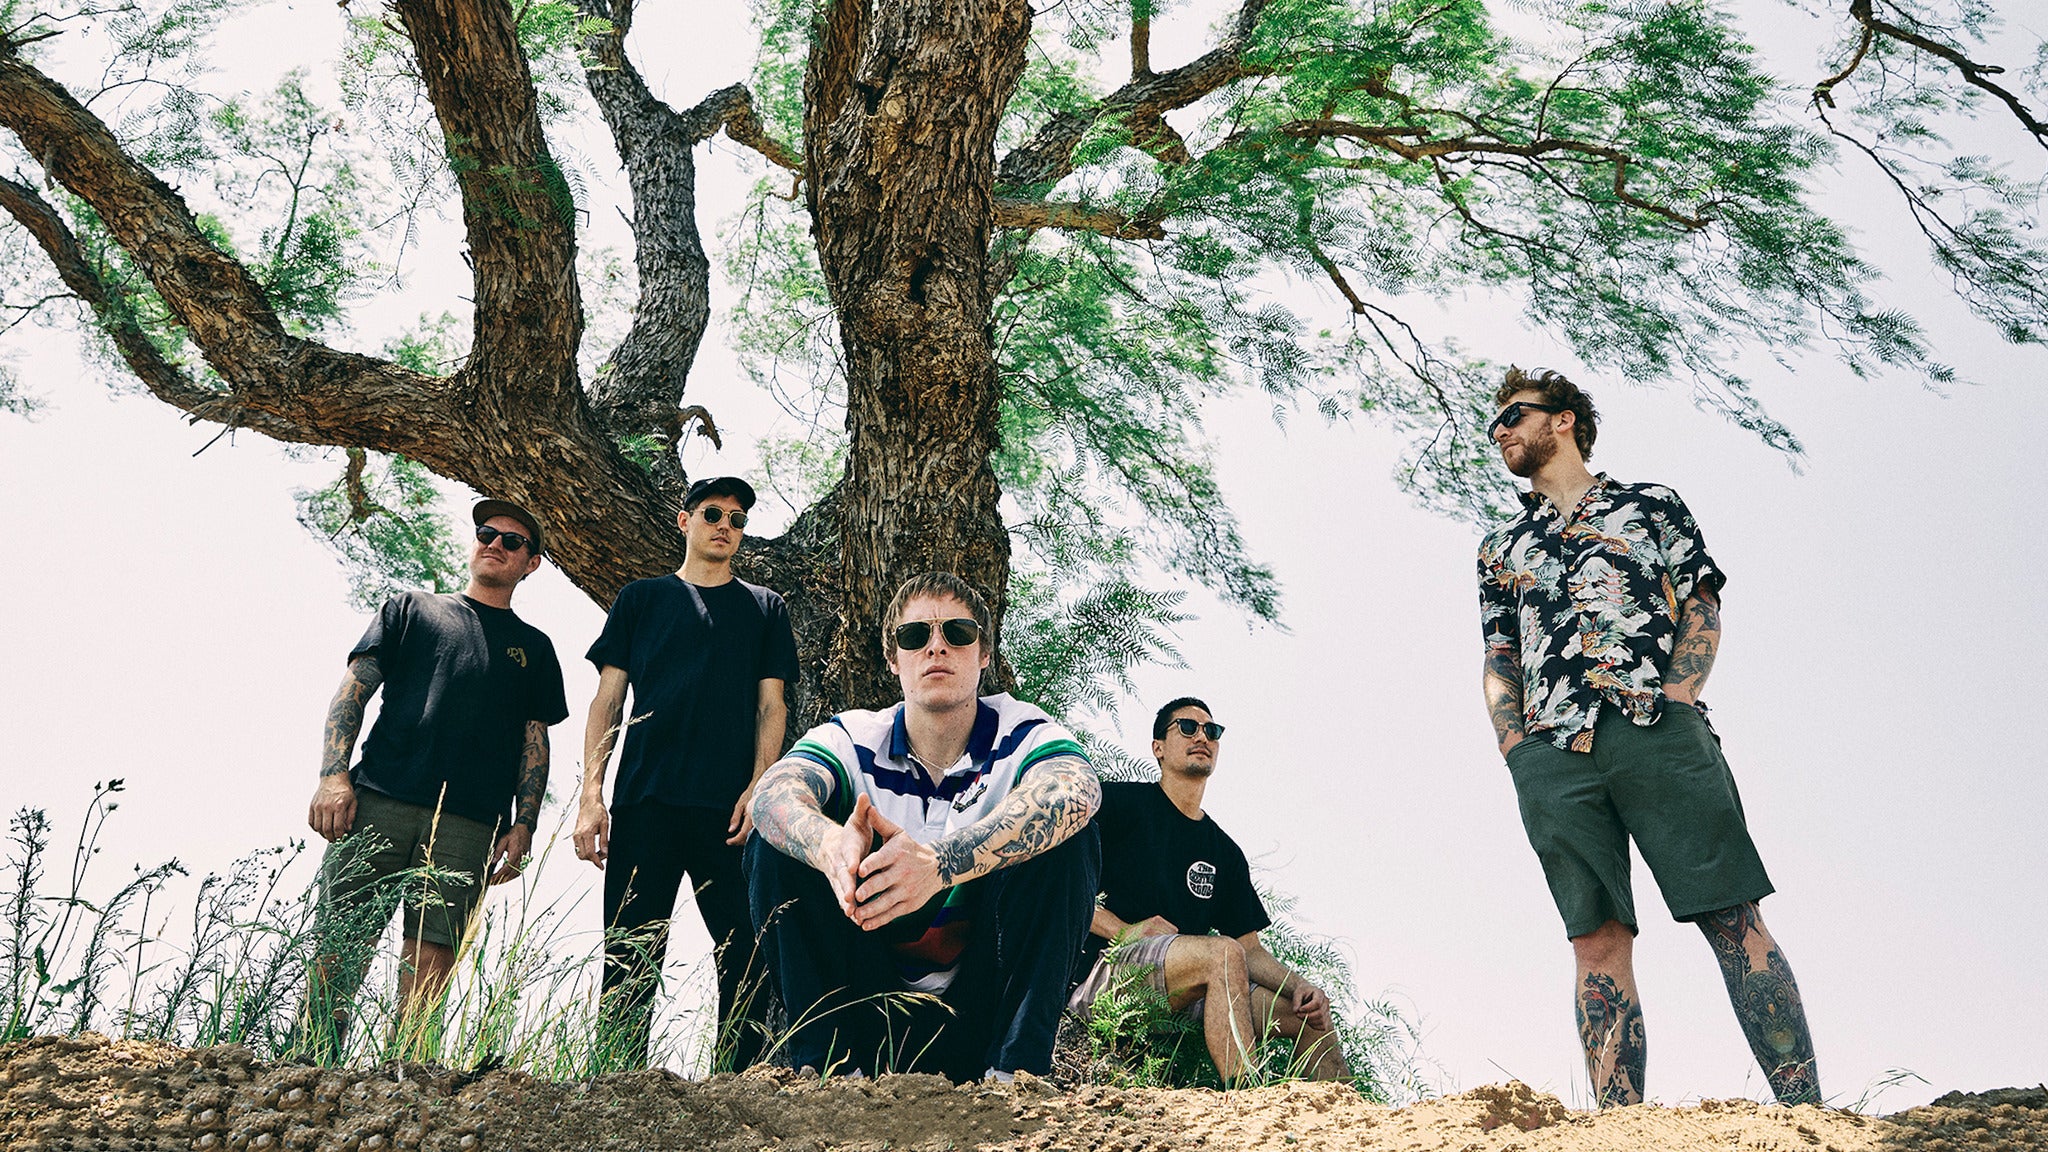 The Story So Far tickets, presale info and more Box Office Hero